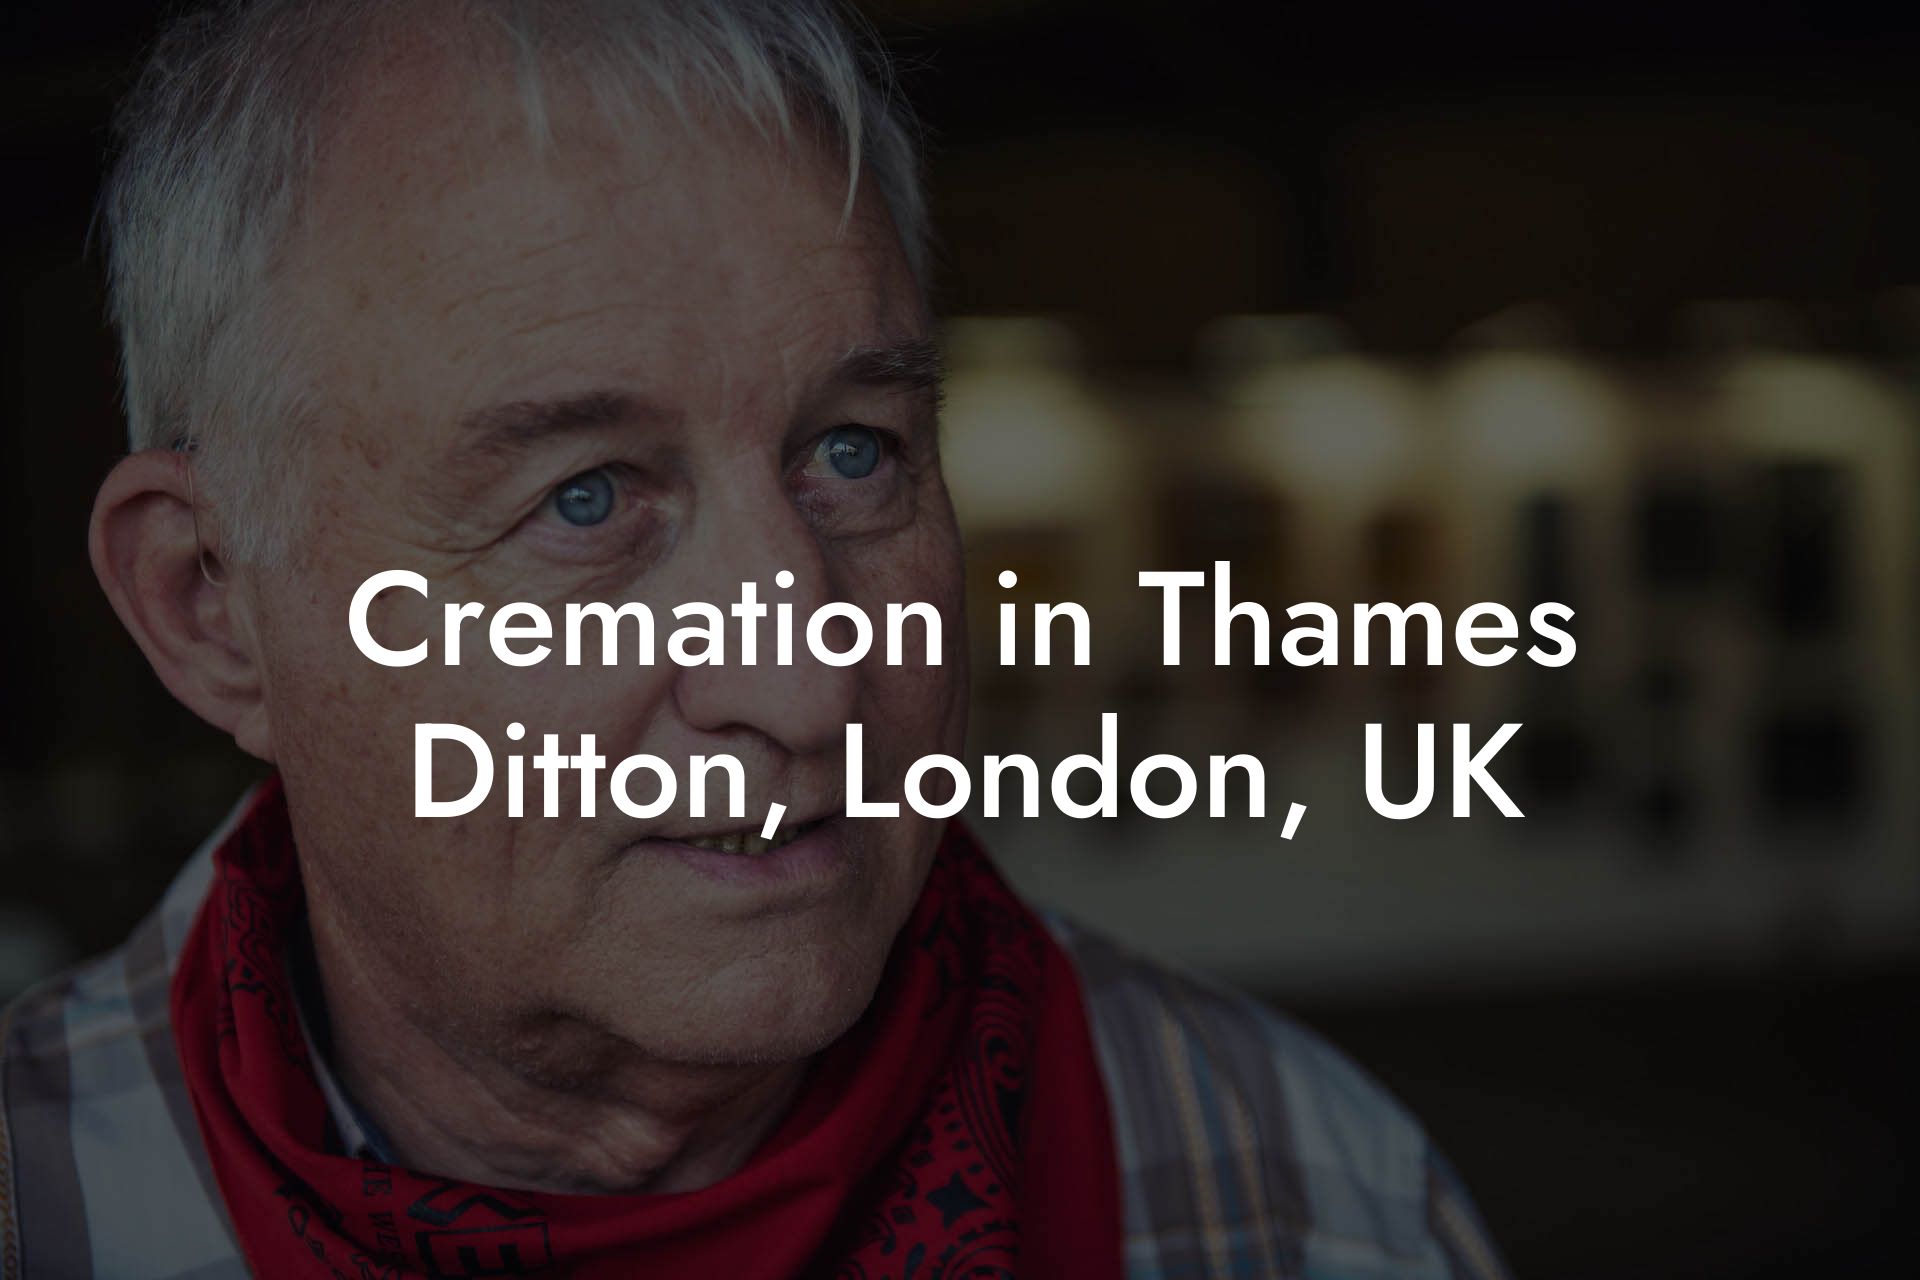 Cremation in Thames Ditton, London, UK